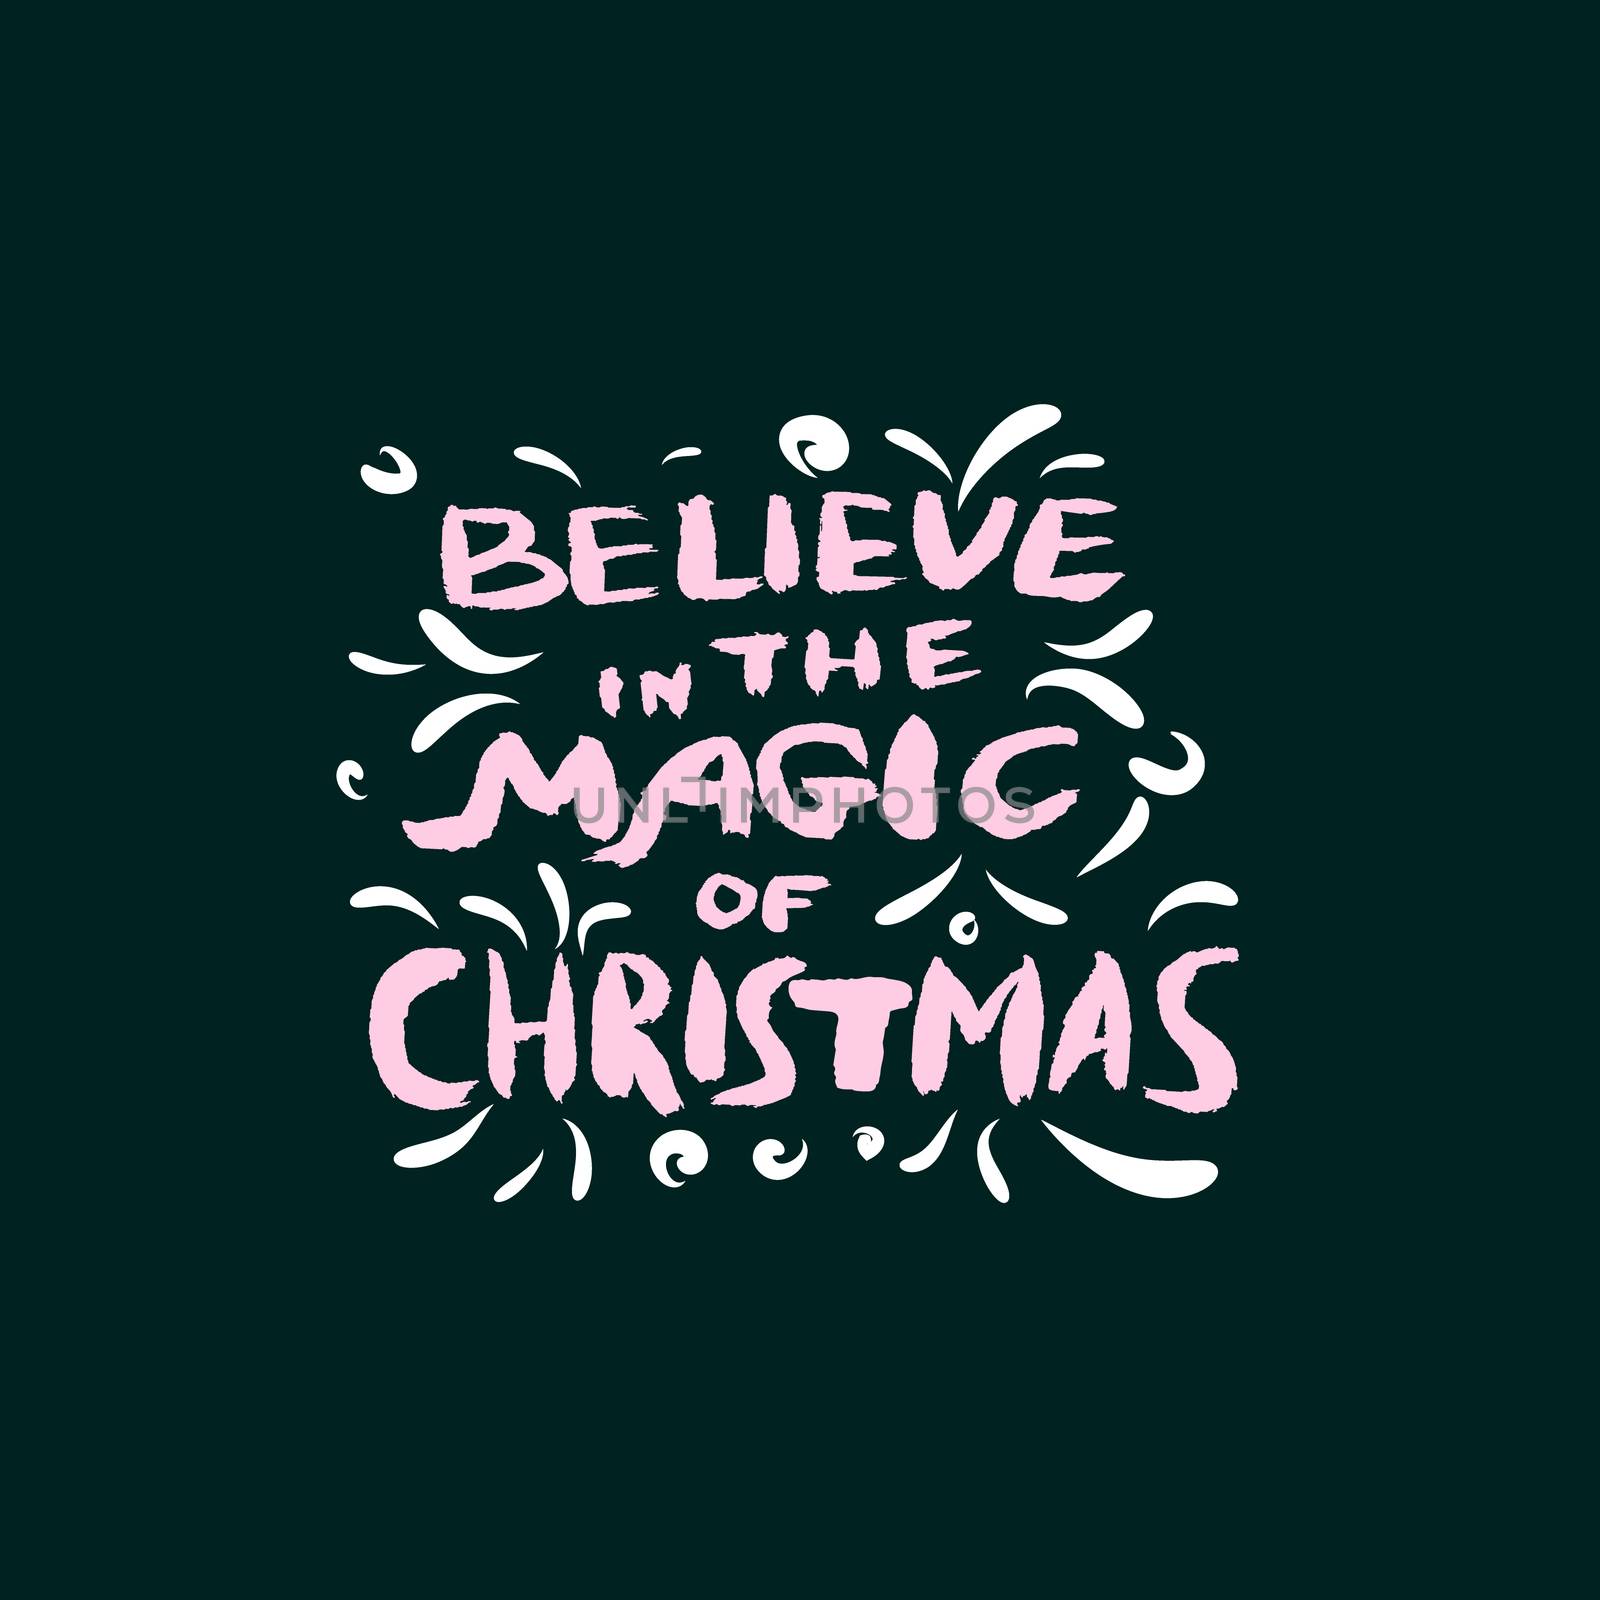 Merry Christmas to Everyone, Background With Typography and Elements